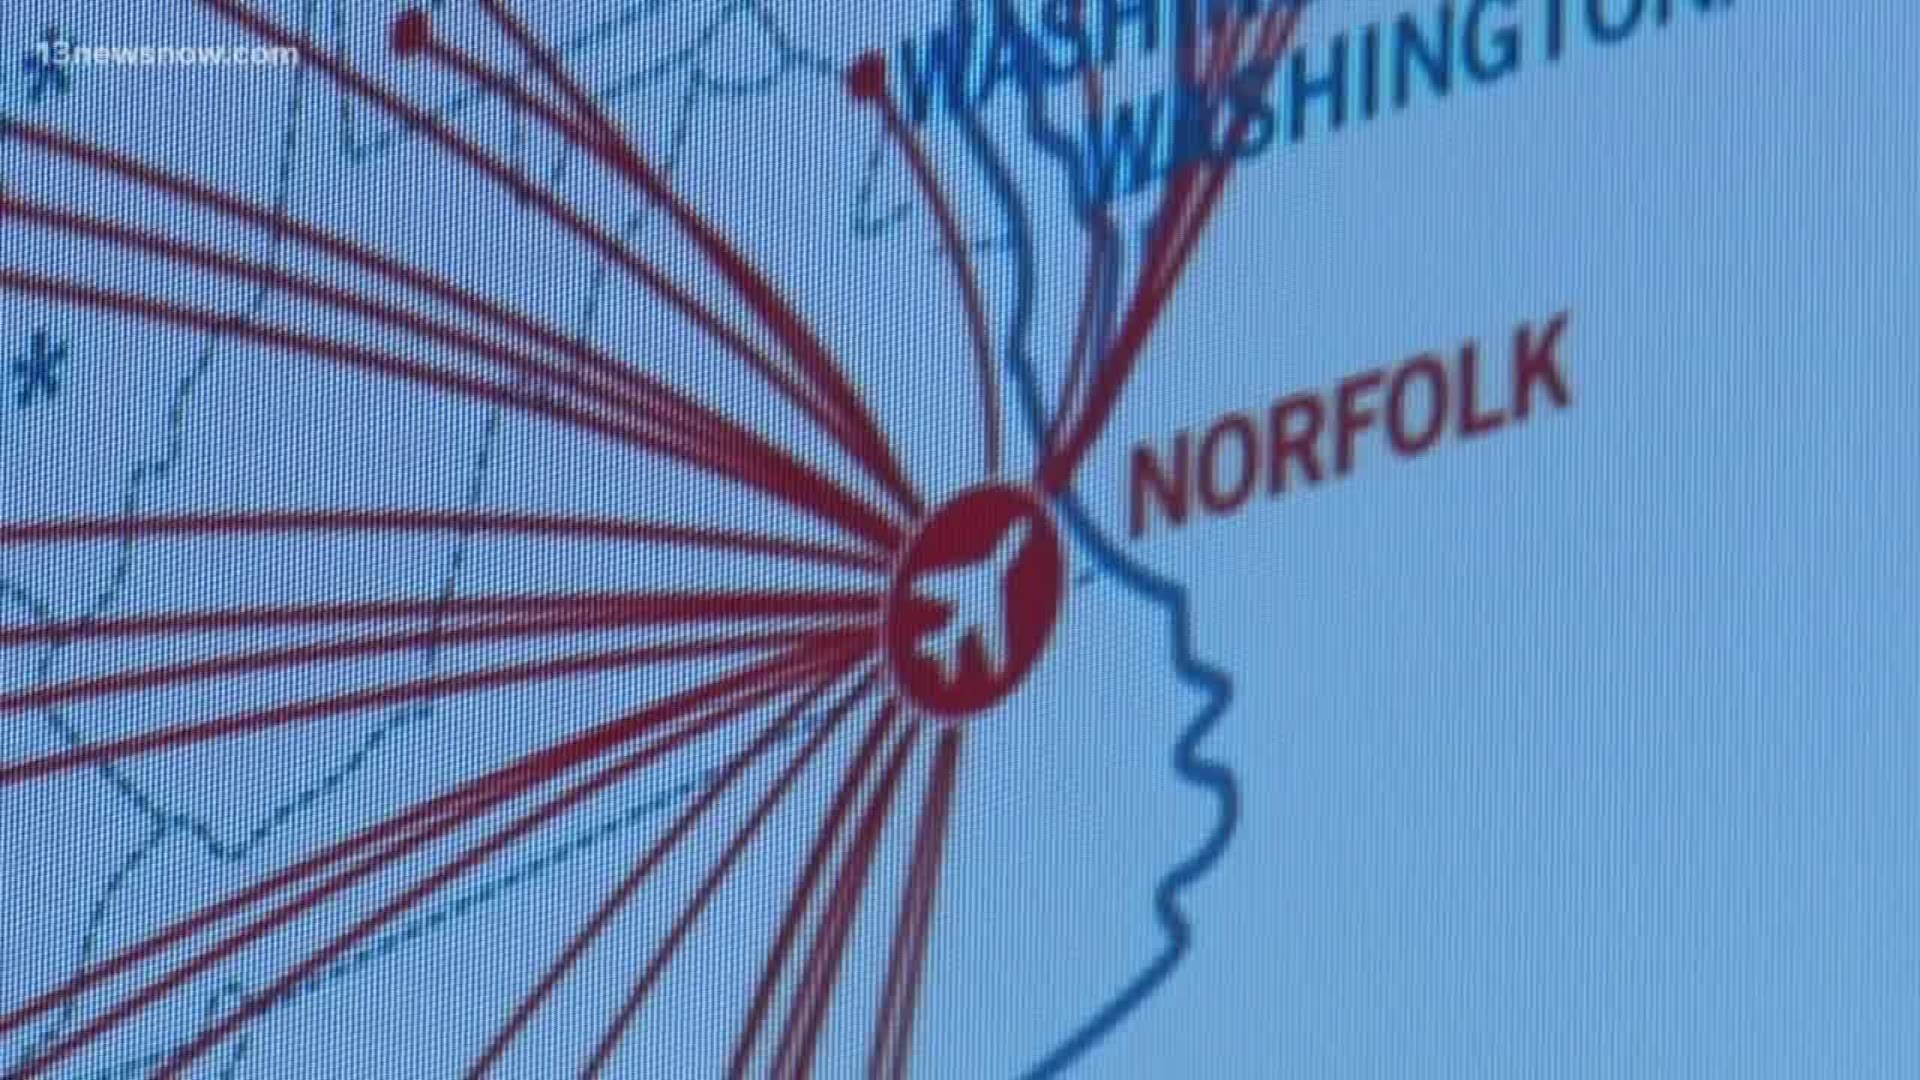 13News Now Allison Bazzle was at Norfolk International Airport where officials played a public service announcement on the coronavirus.